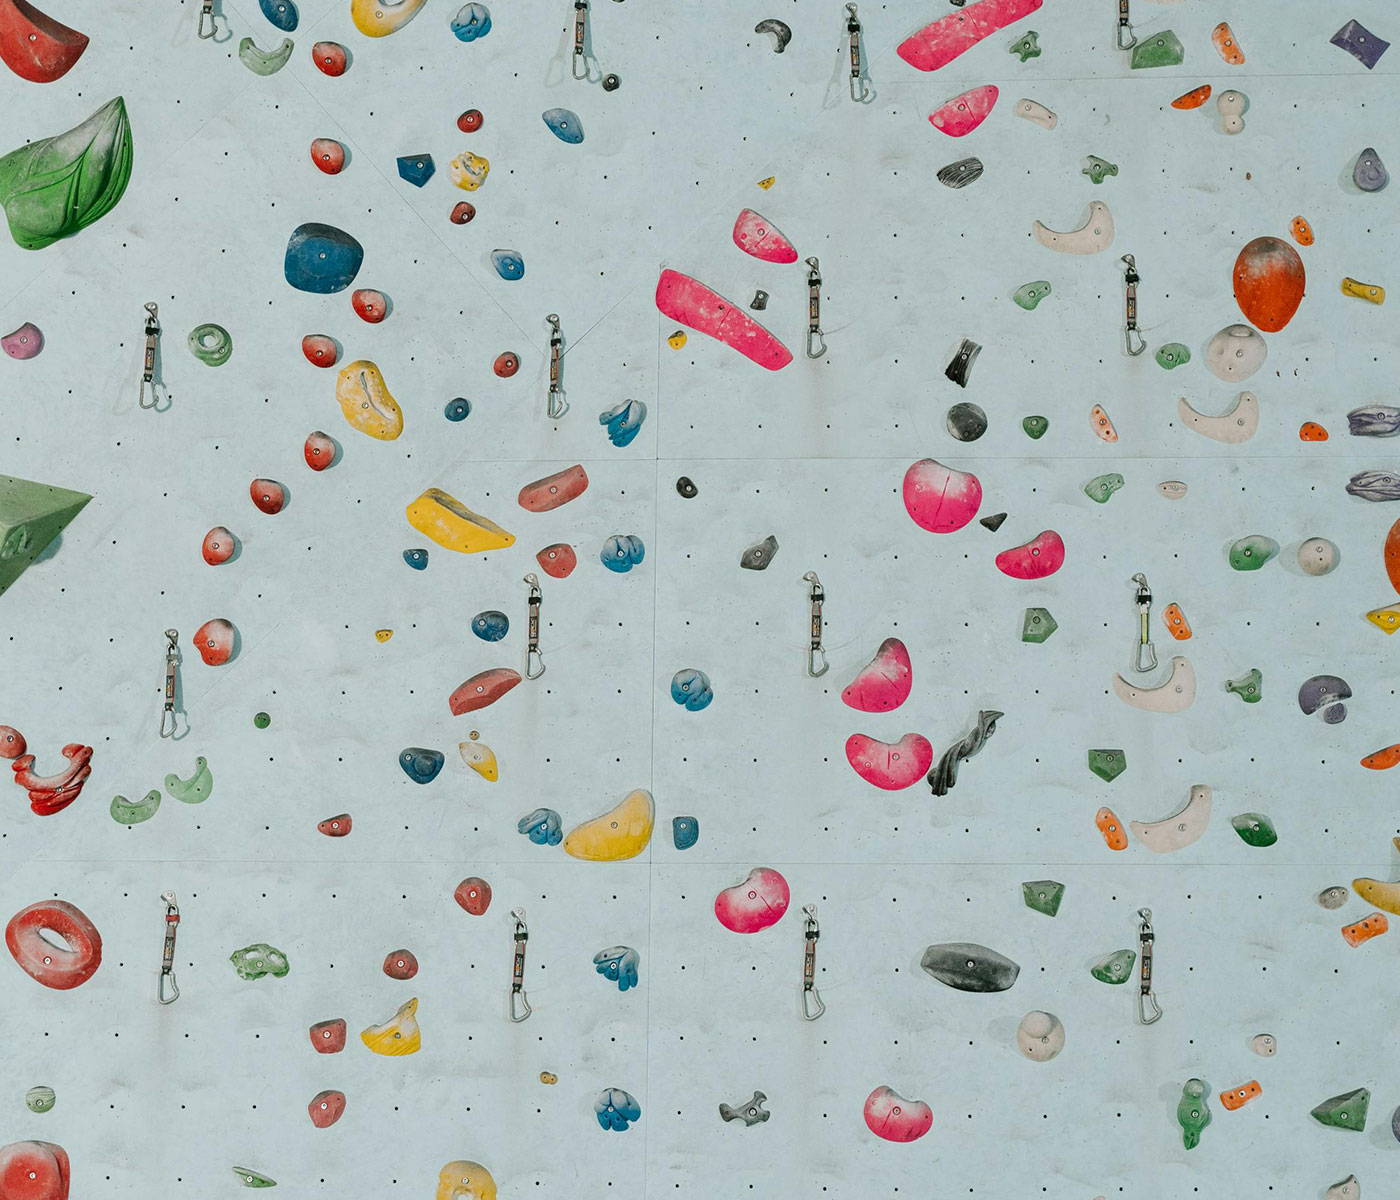 A vibrant photo showing the colourful indoor rock climbing holds scattered against a white wall.